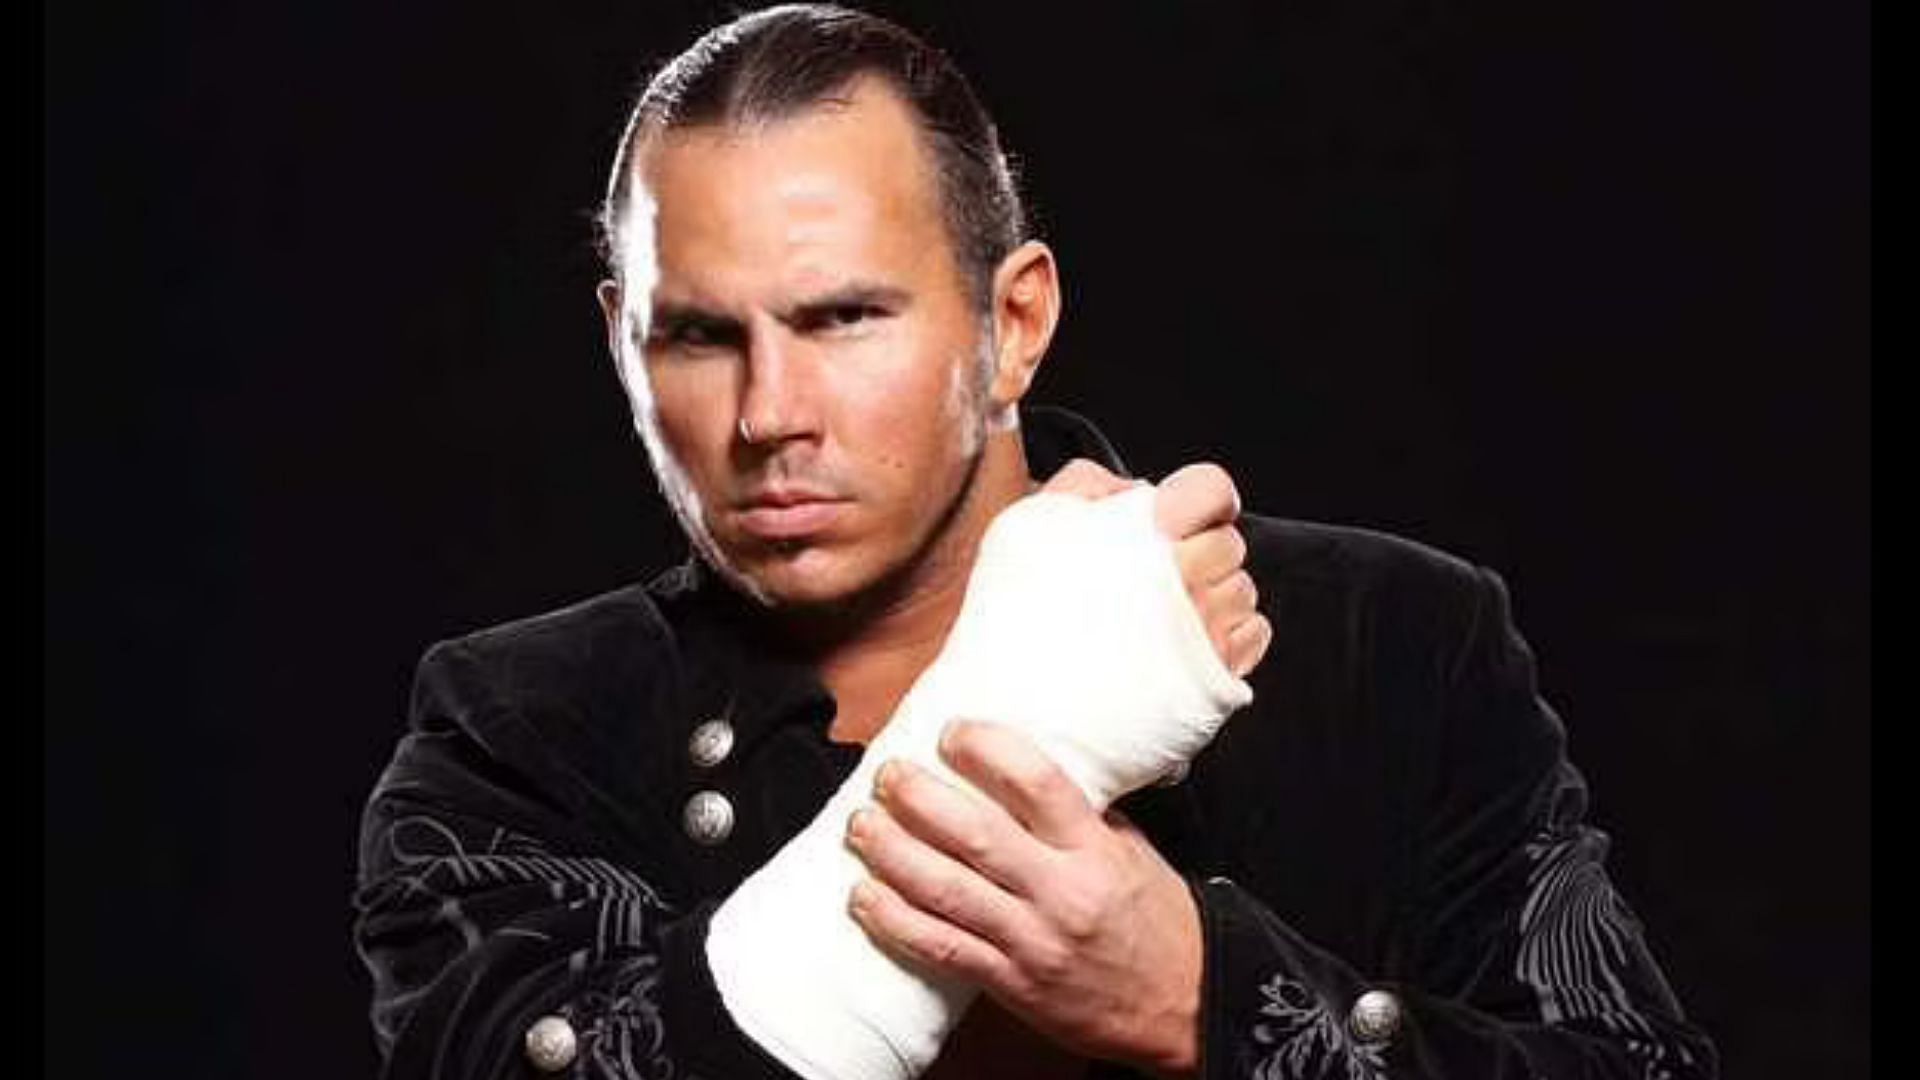 Matt Hardy is the &lsquo;Starmaker&rsquo; and the &lsquo;Star-taker&rsquo; too, it would seem